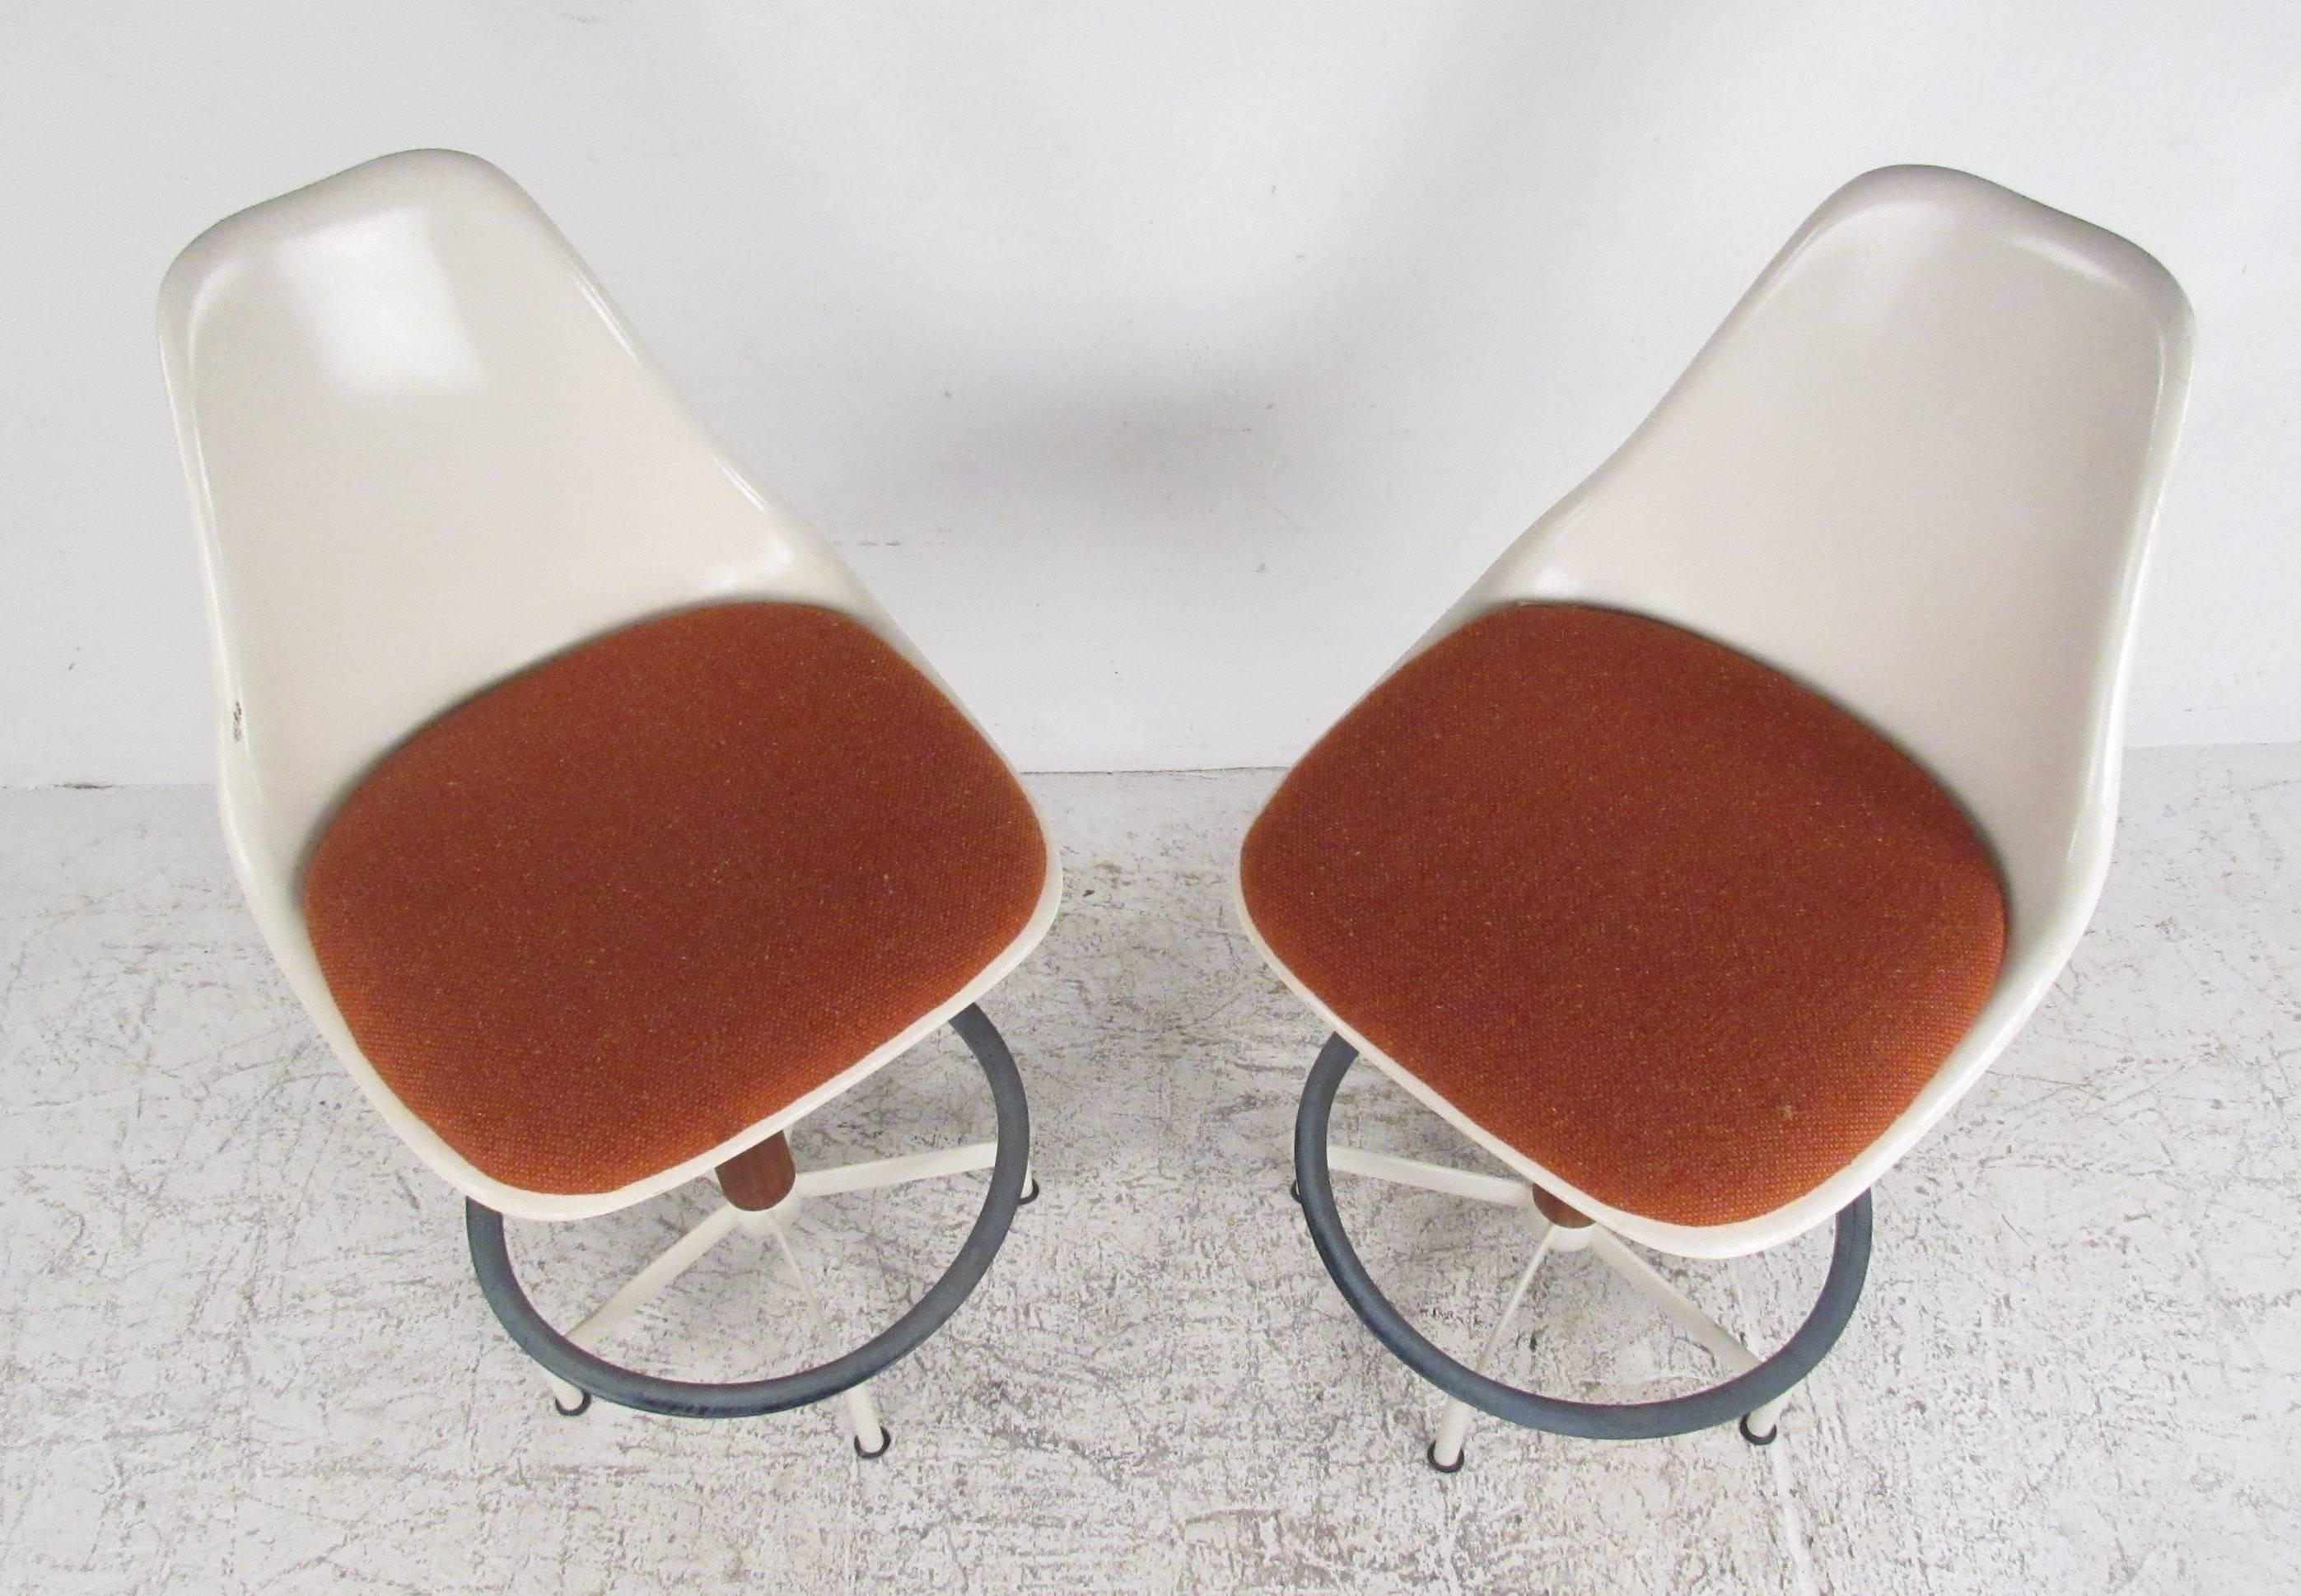 Pair of Mid-Century fiberglass shell stools with upholstered seats and a cast steel base manufactured by Burke Inc., Dallas, Texas. Please confirm item location (NY or NJ).